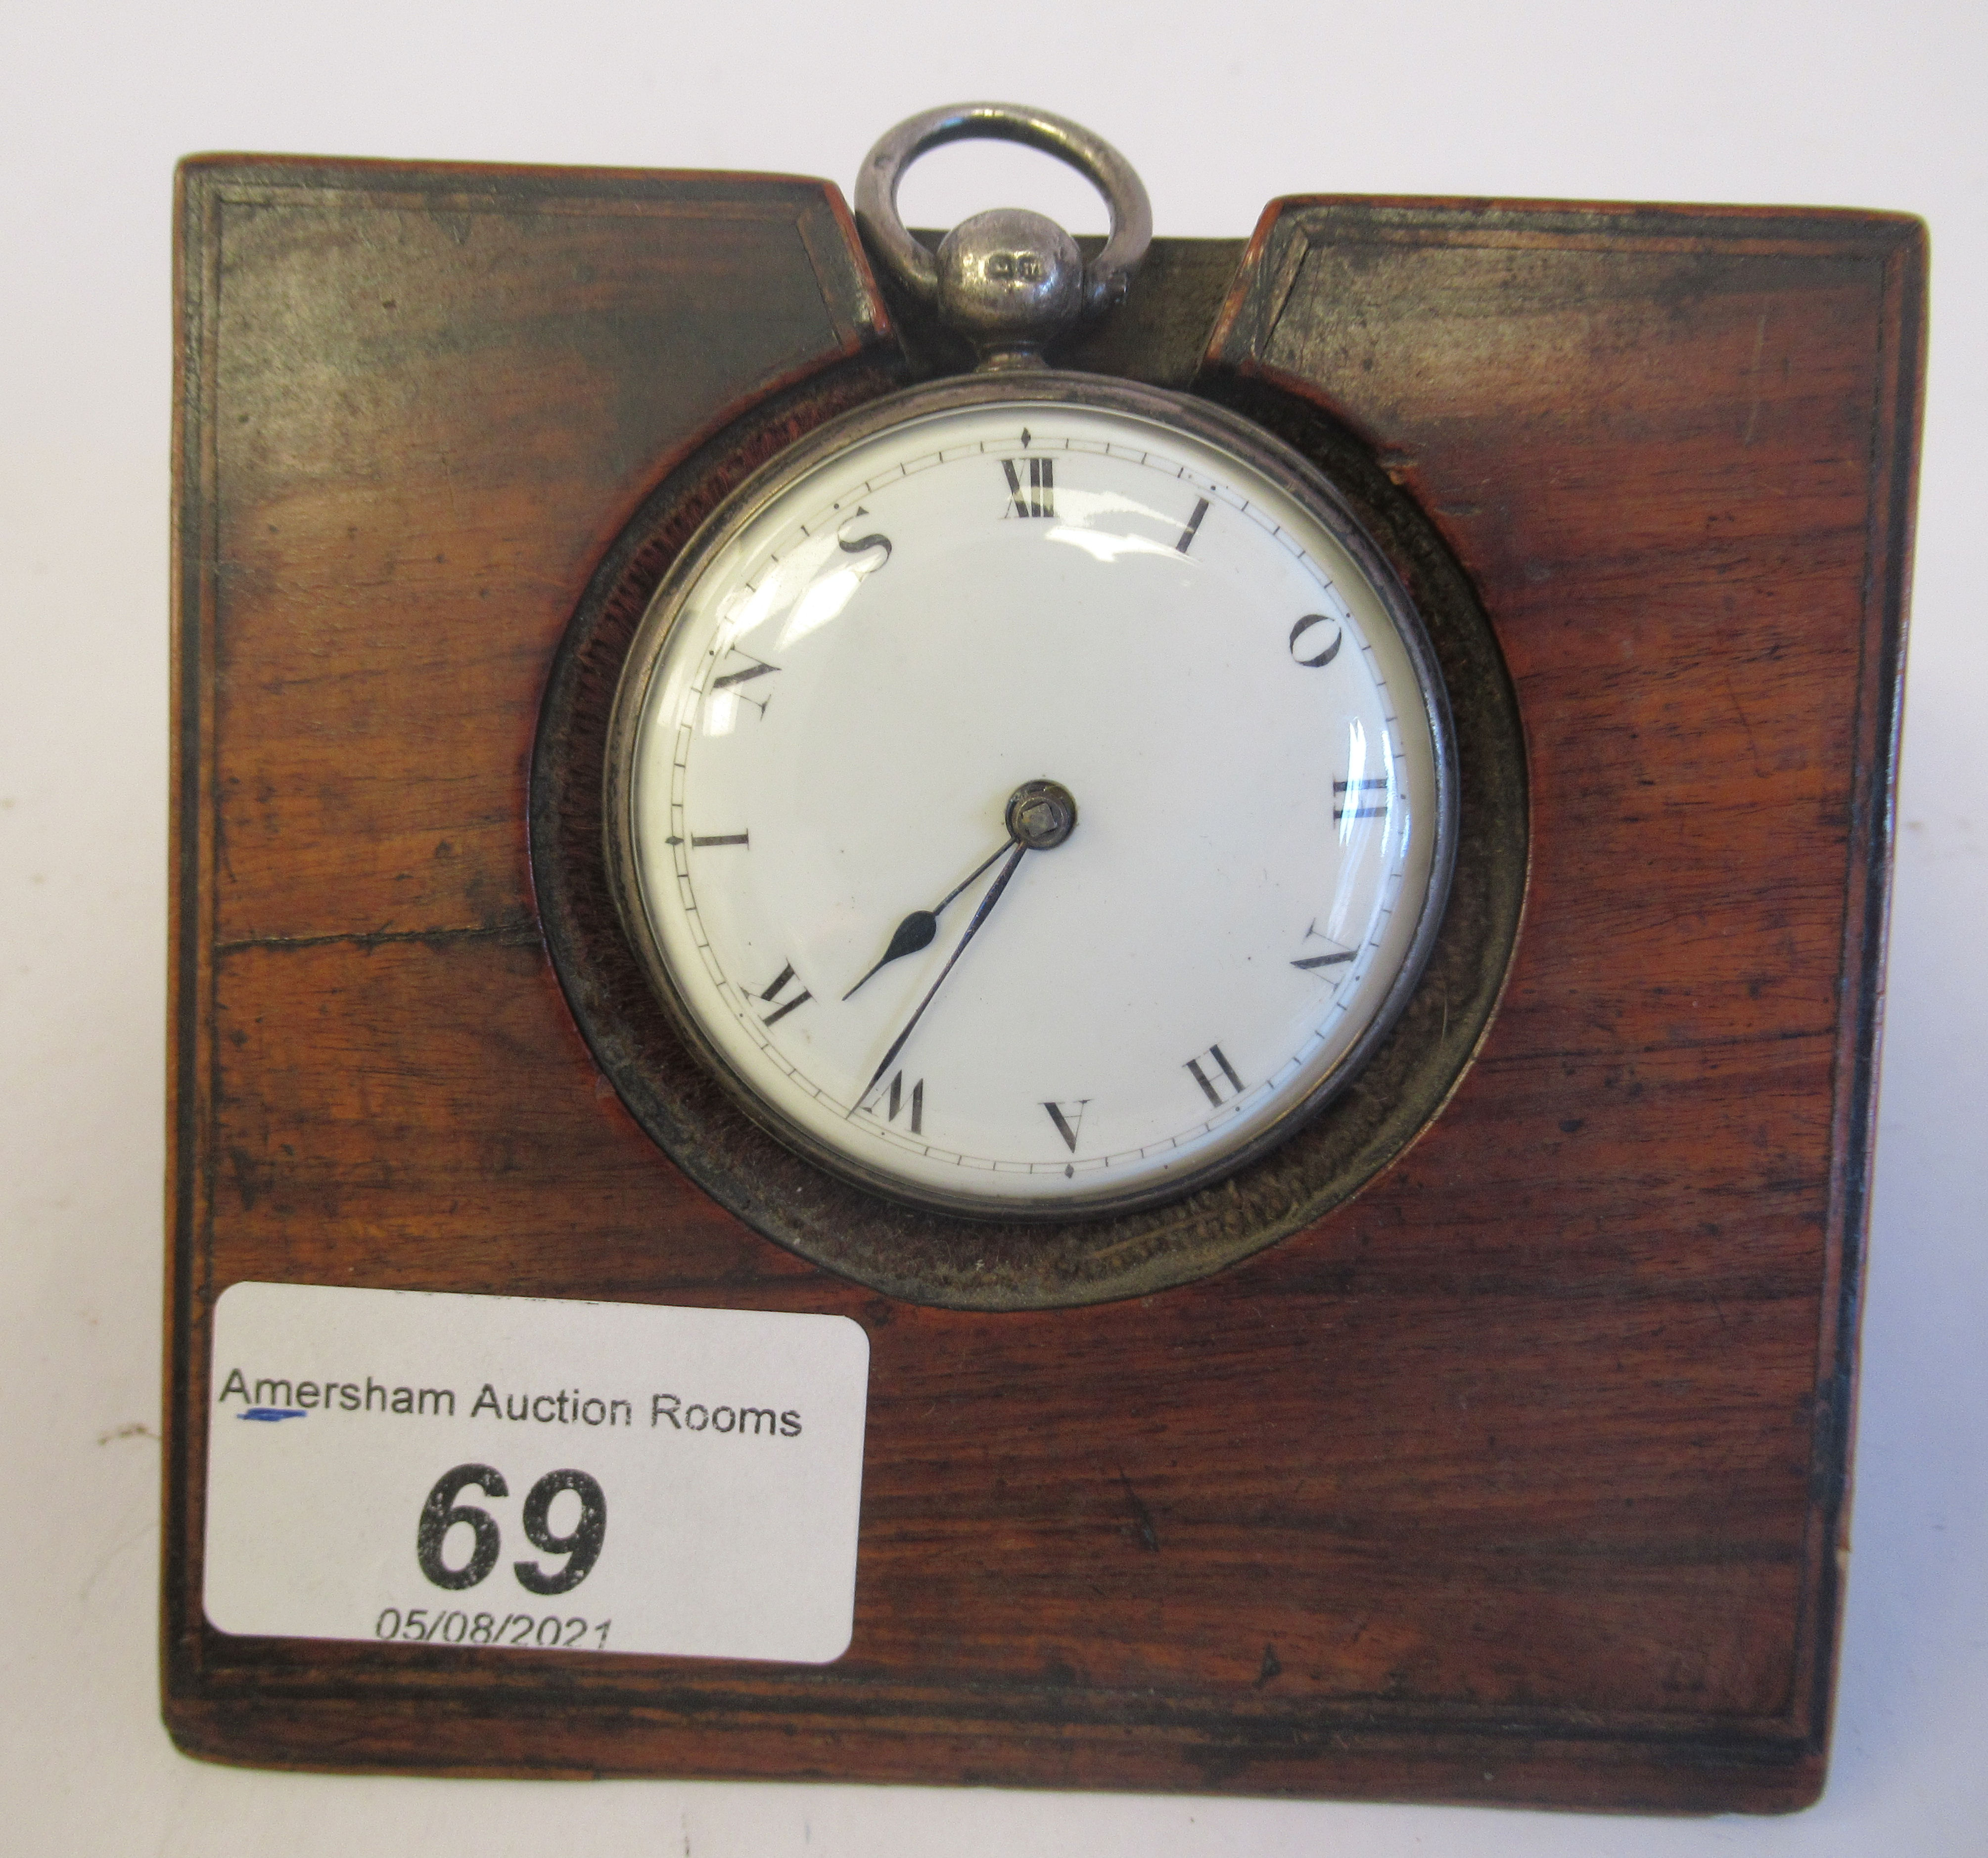 A 19thC silver cased pocket watch, faced by a convex white enamel dial, the numerals replaced by the